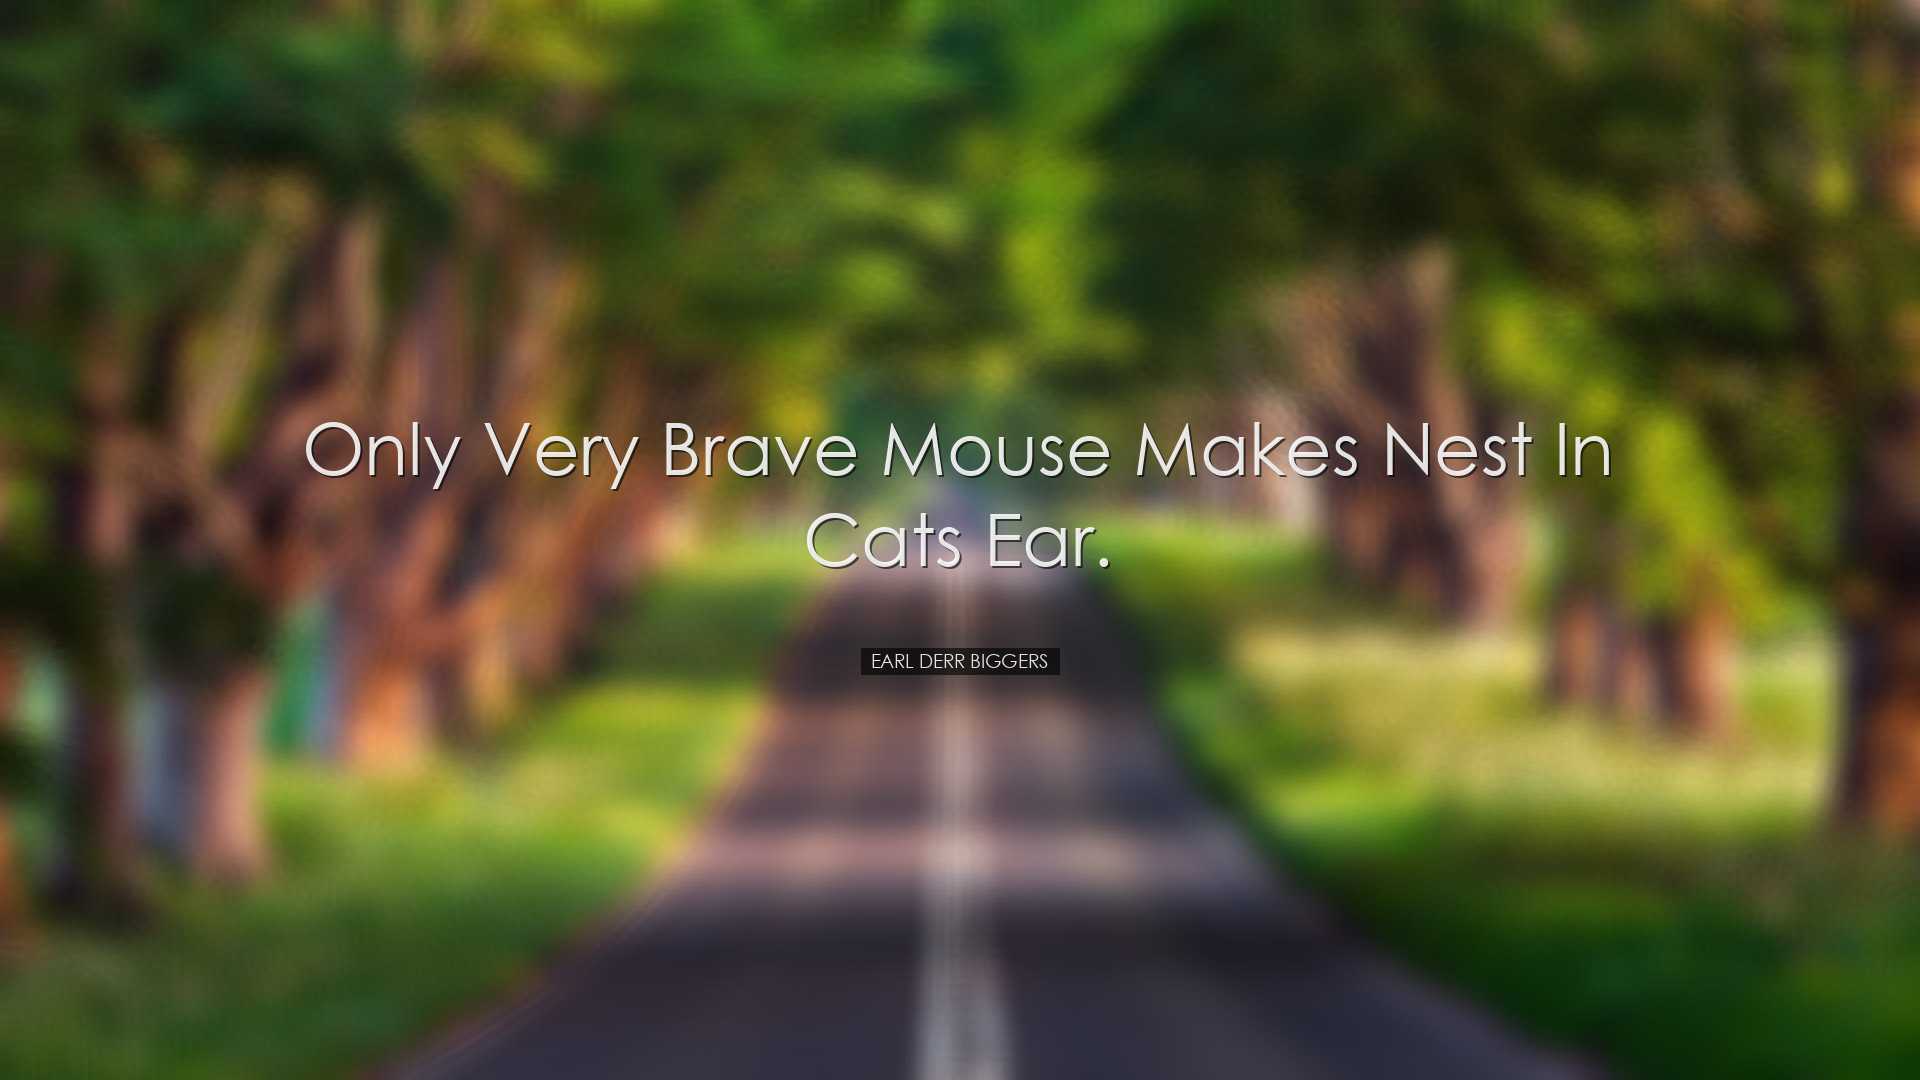 Only very brave mouse makes nest in cats ear. - Earl Derr Biggers